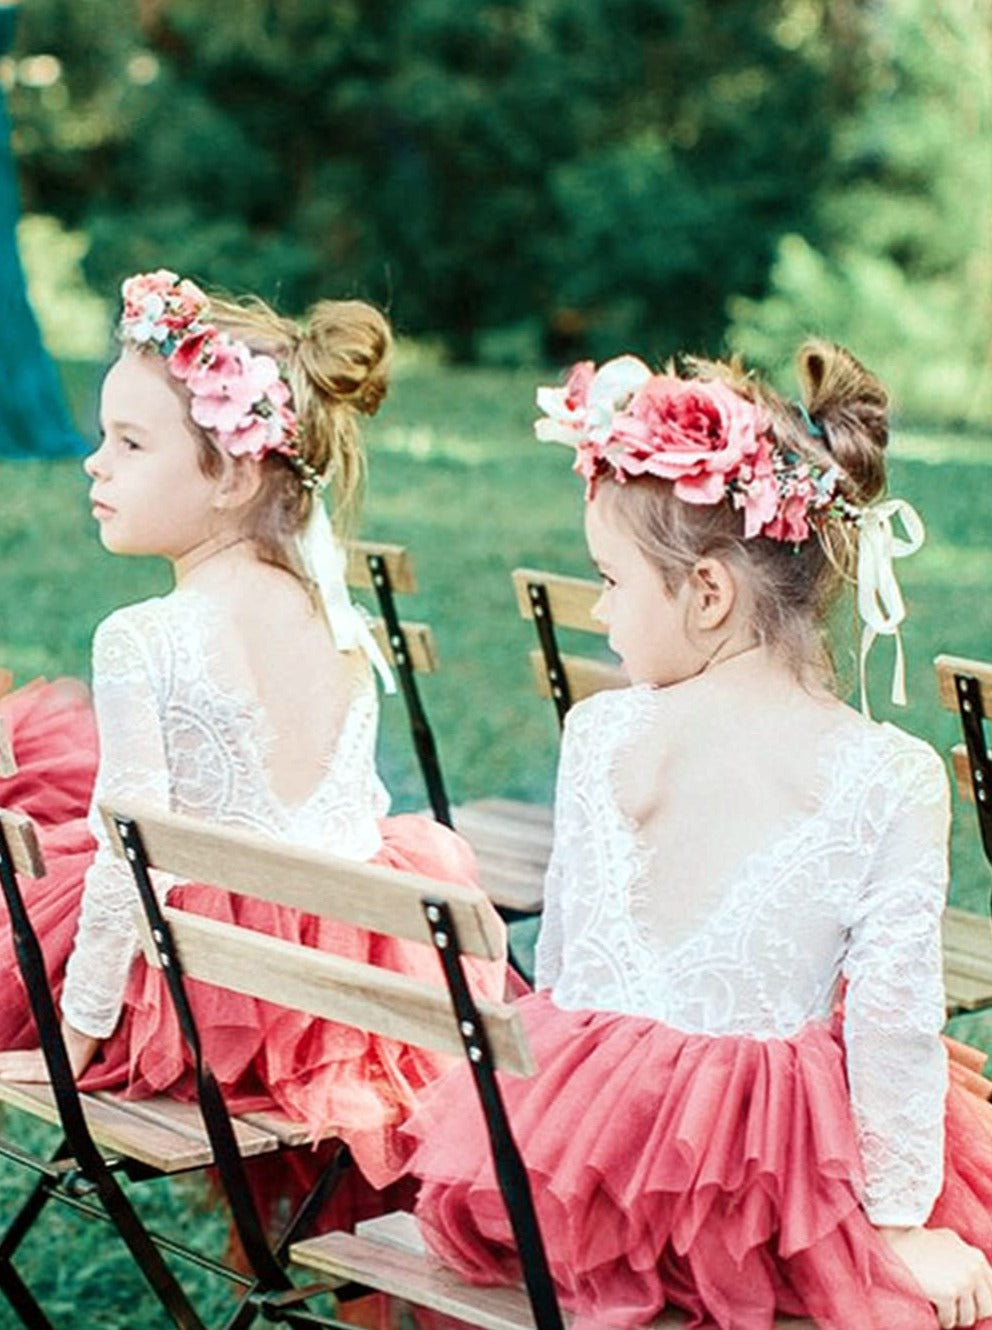 2Bunnies Flower Girl Dress Rose Lace Back A-Line Long Sleeve Tiered Tulle Knee (Dusty Pink) - 2BUNNIES